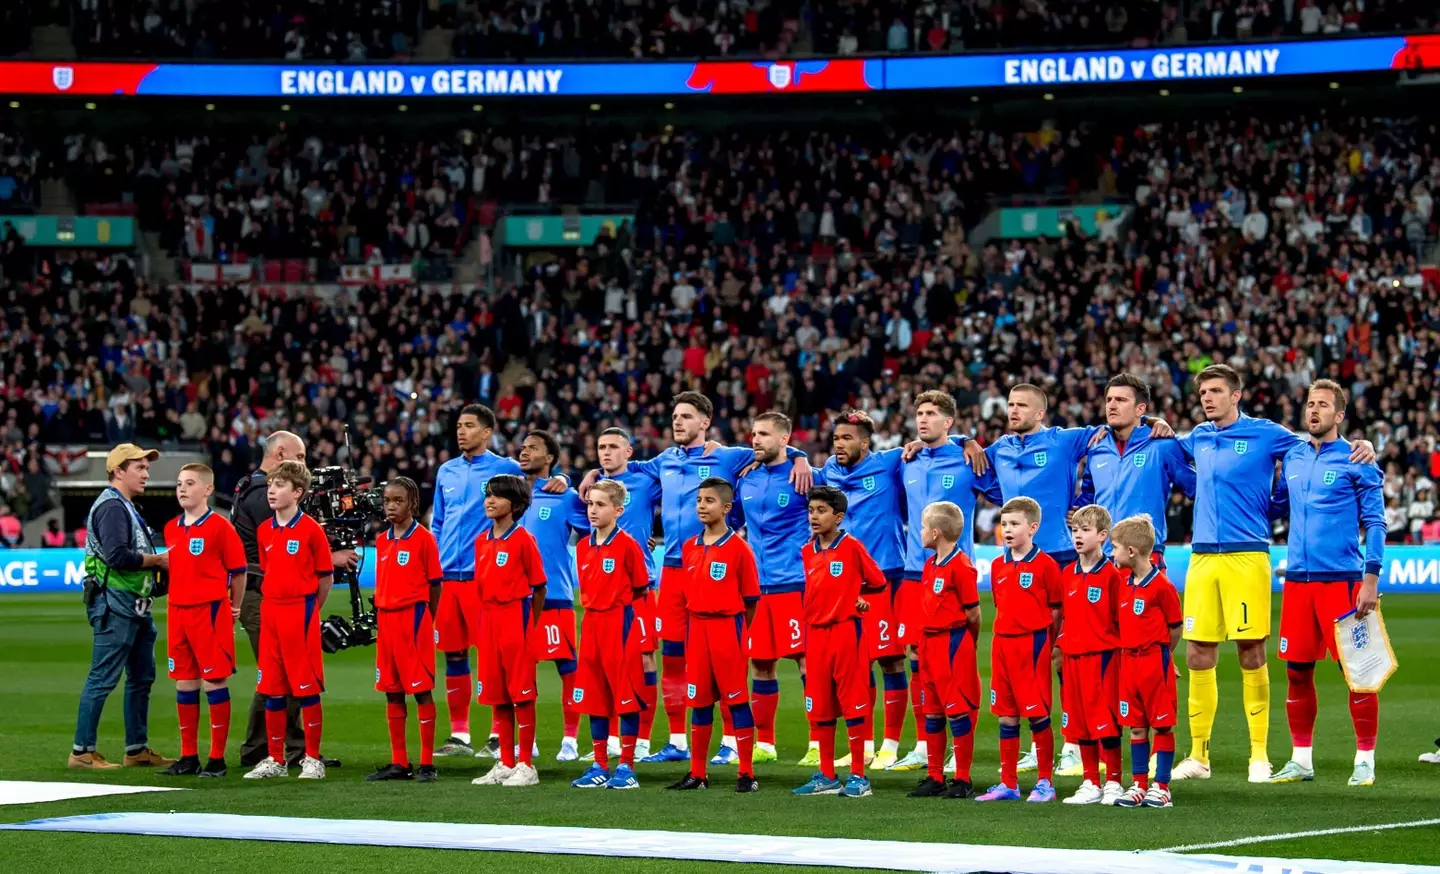 England in the Nations League at Wembley (Image